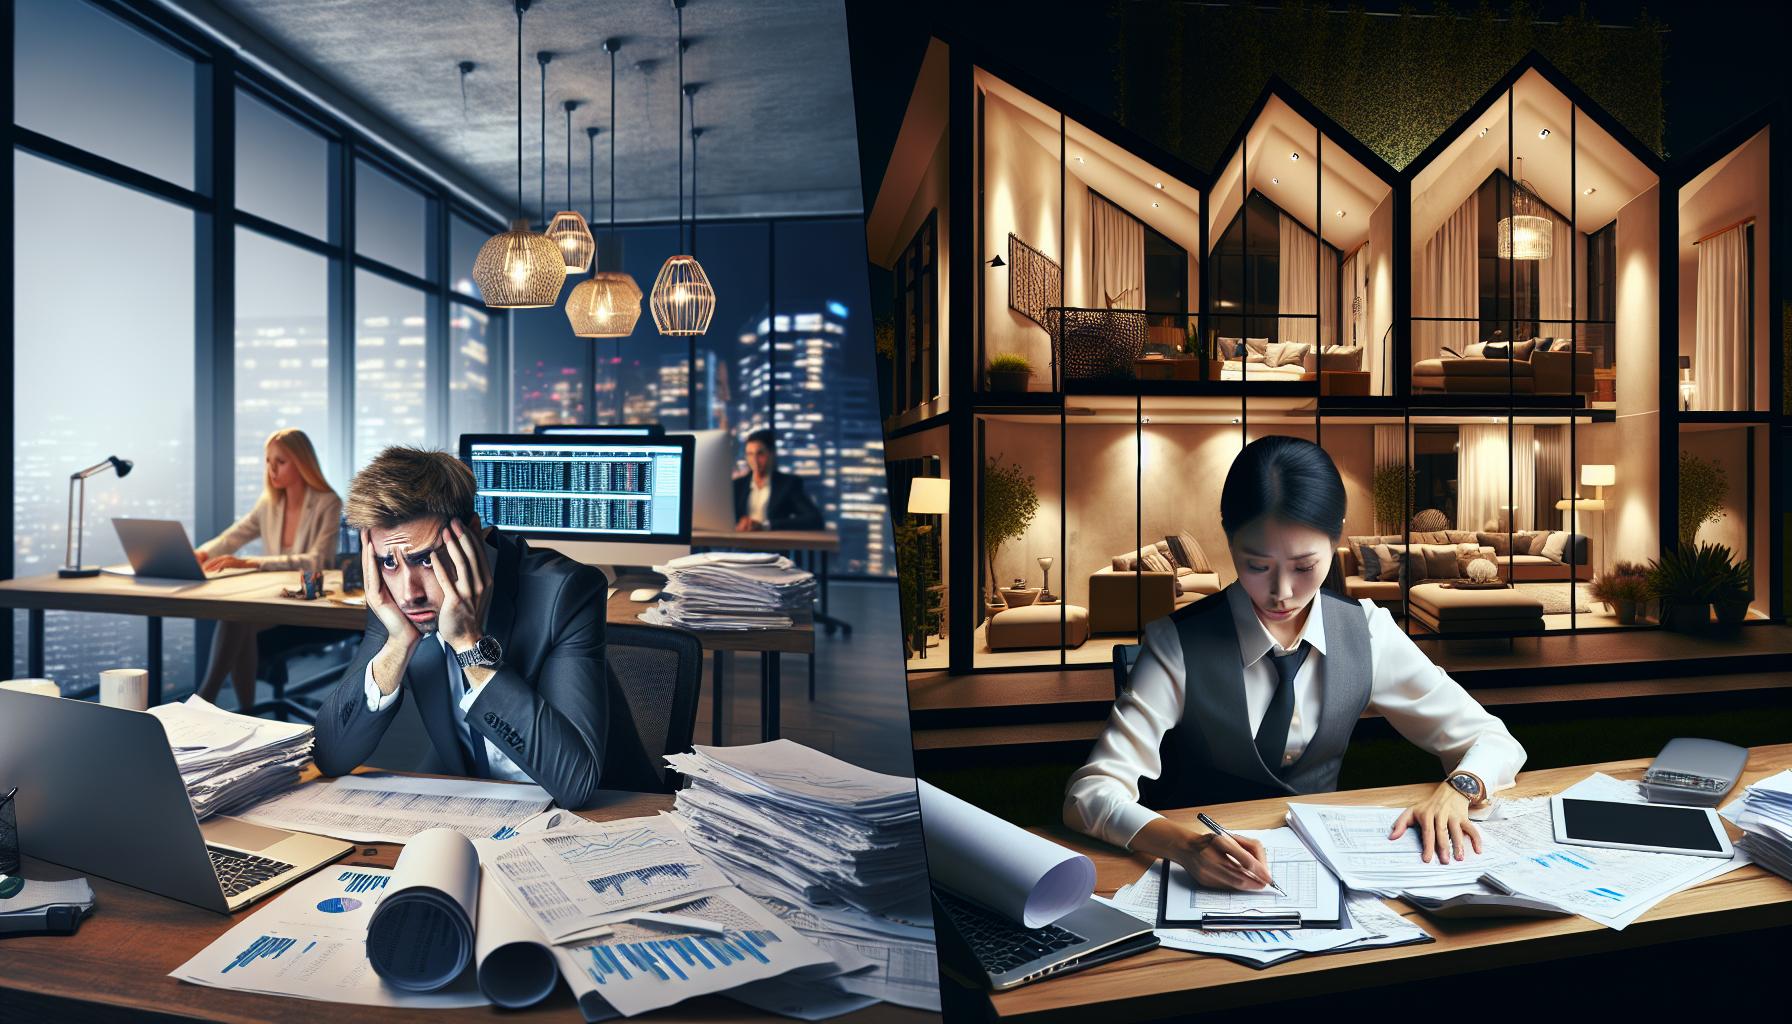 Two pictures of people working at a desk at night.